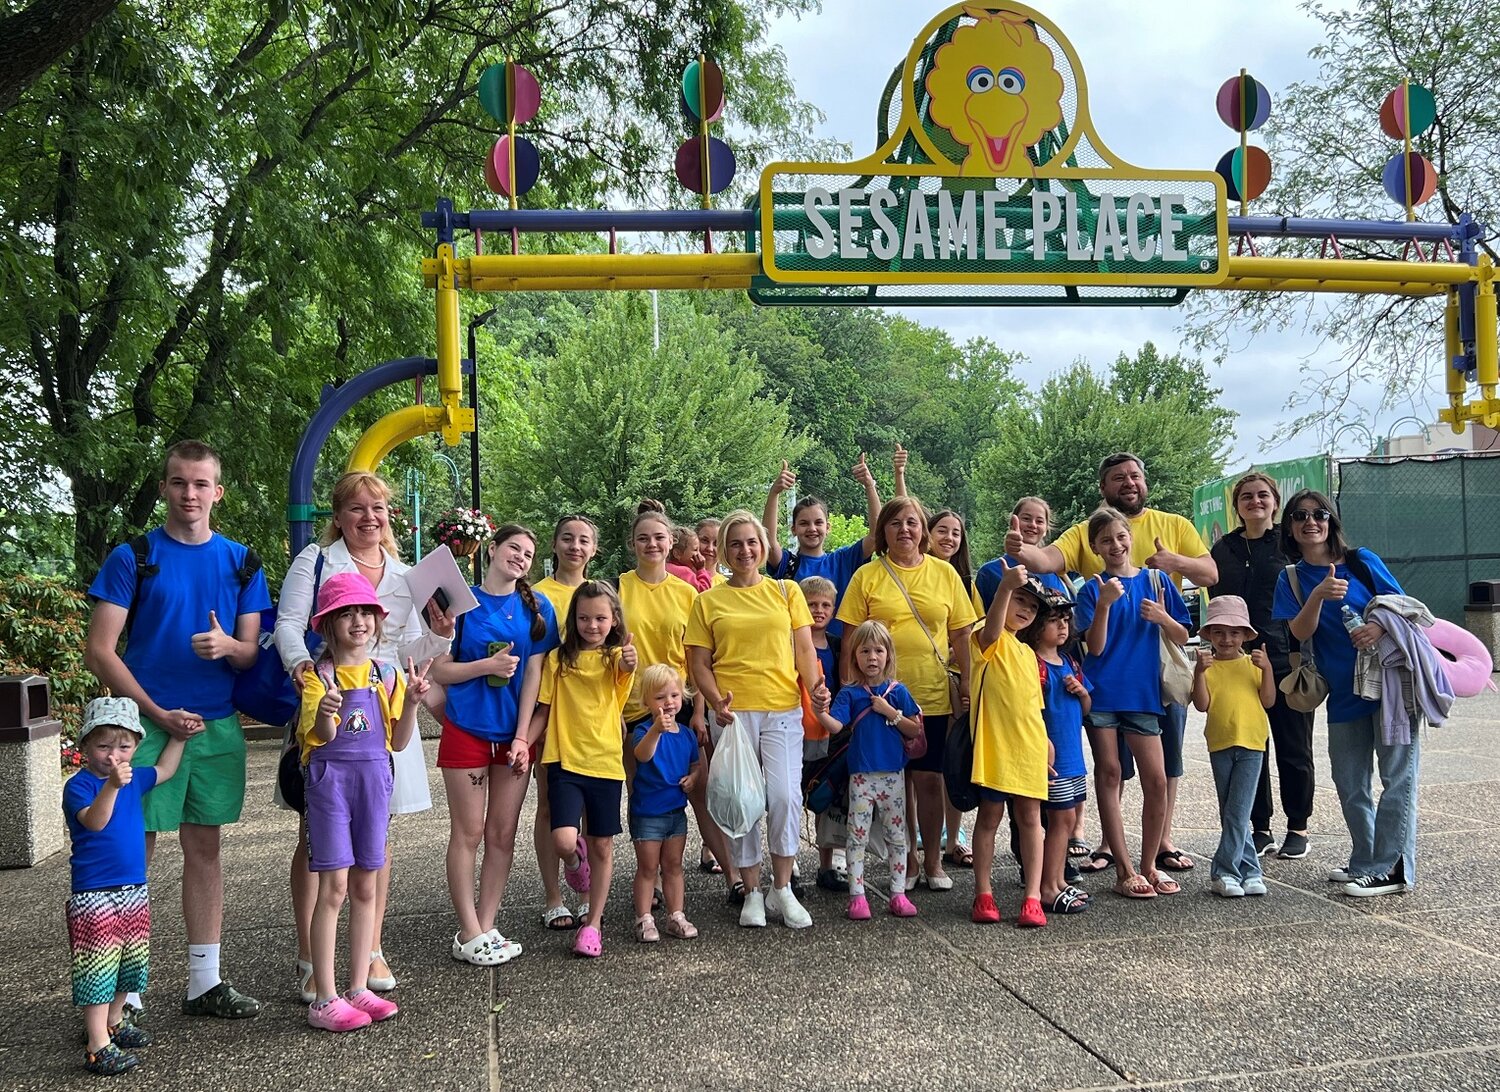 A couple dozen refugees from Ukraine visited Sesame Place on June 21, which has been designated World Refugee Day.